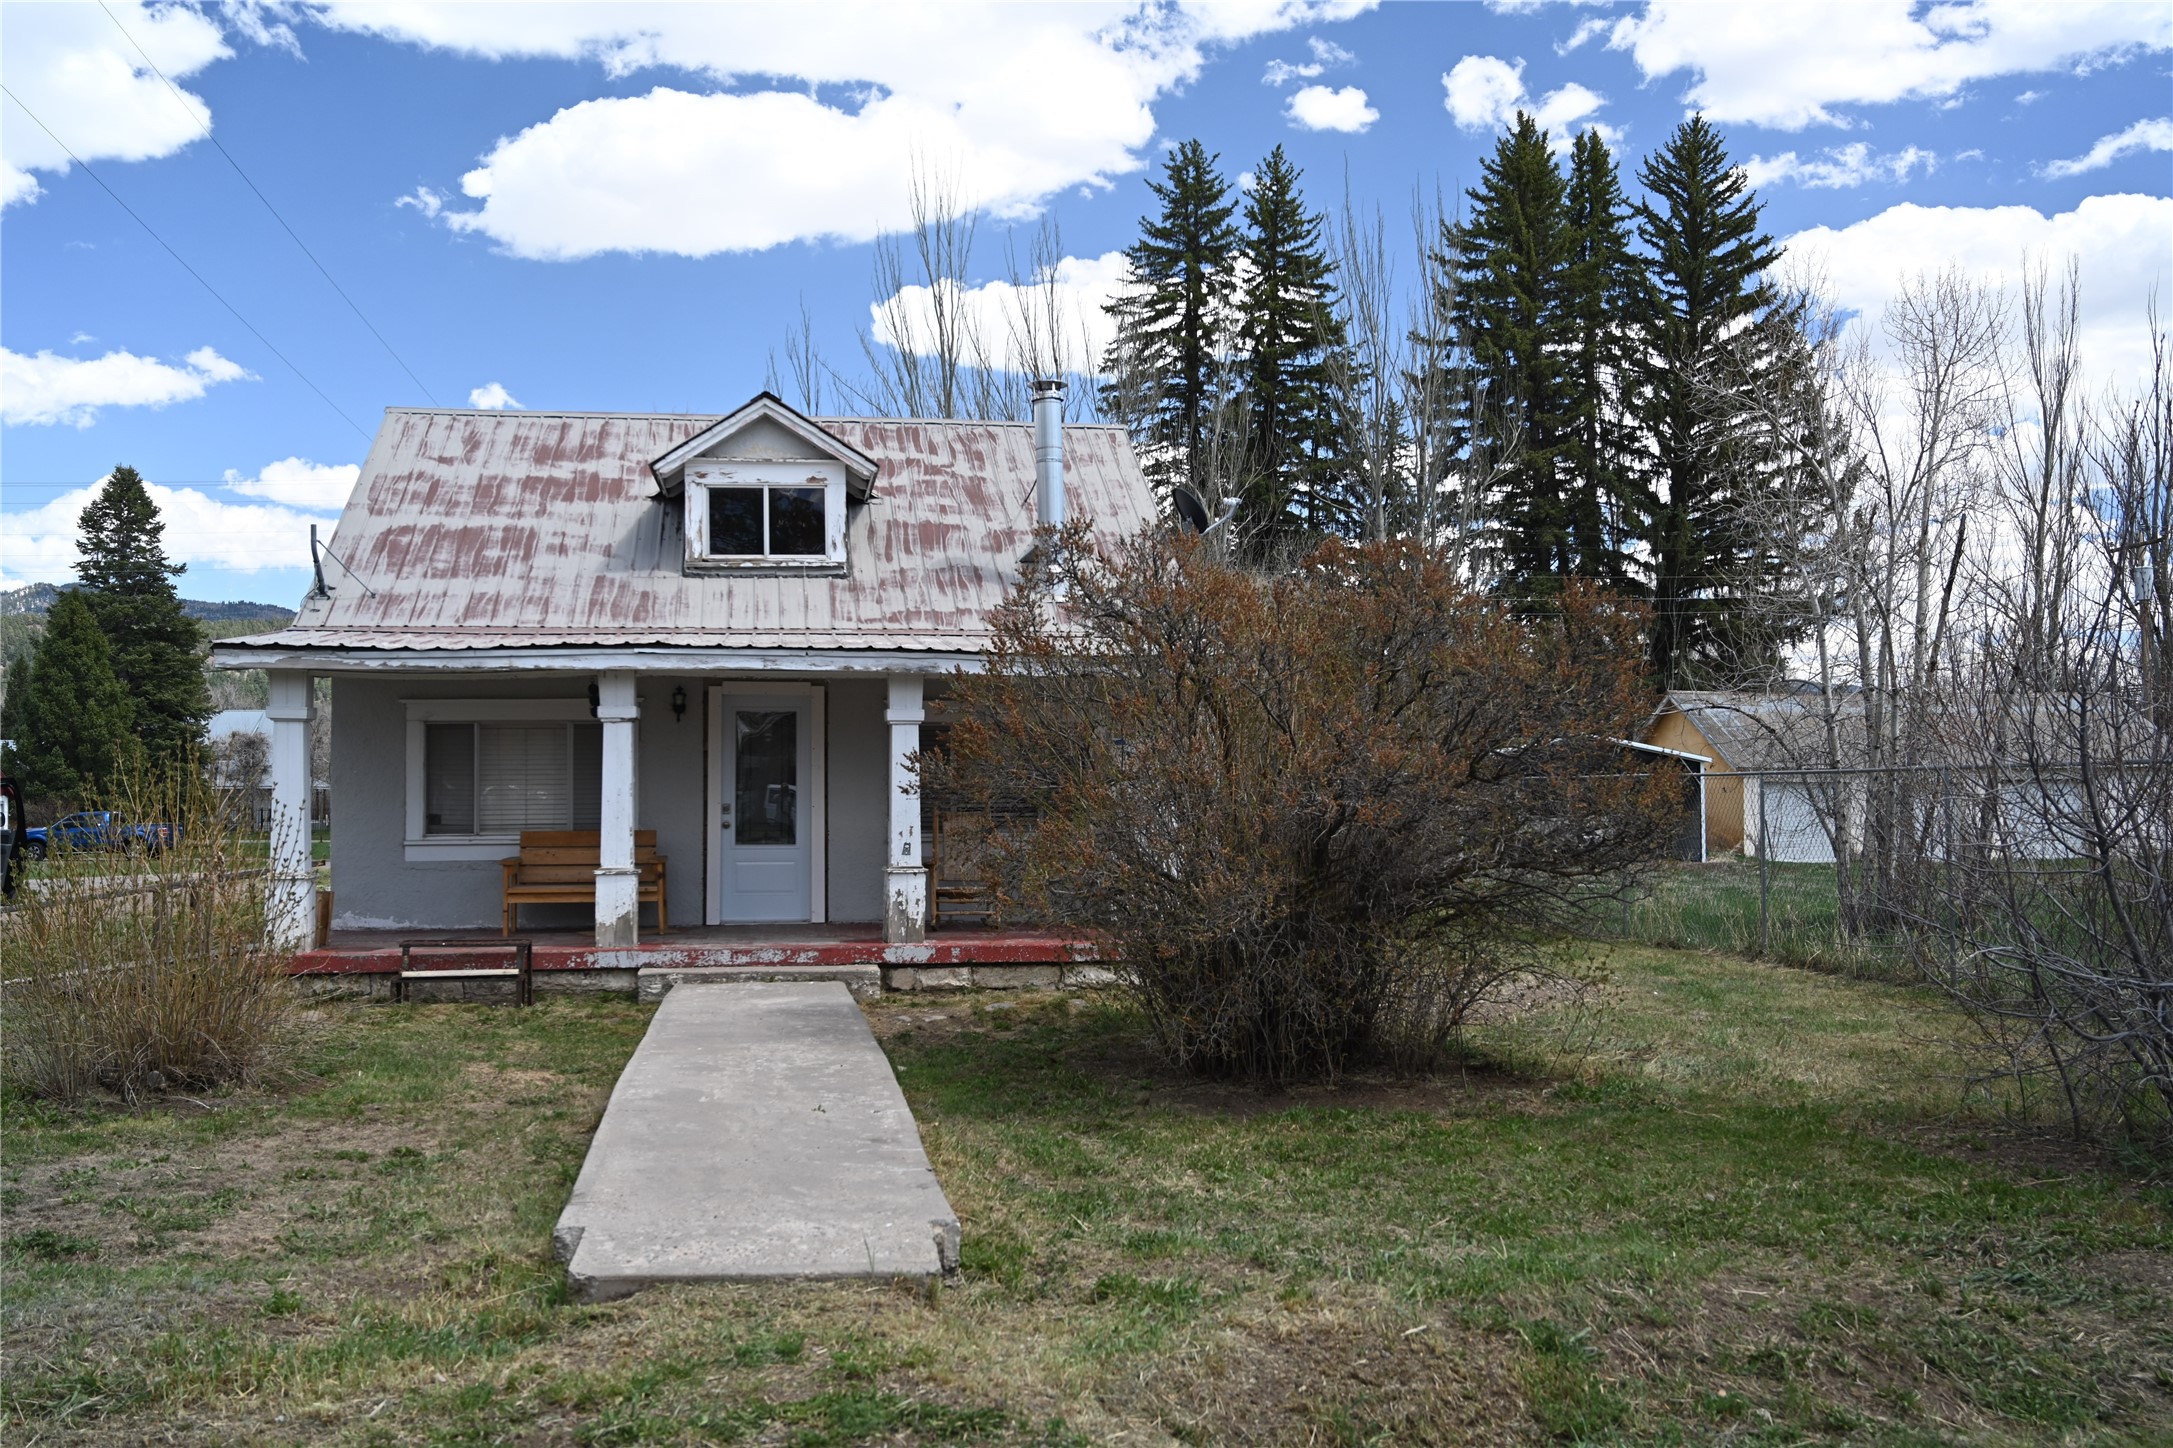 202 Pine Ave, Chama, New Mexico 87520, 3 Bedrooms Bedrooms, ,2 BathroomsBathrooms,Residential,For Sale,202 Pine Ave,202401499